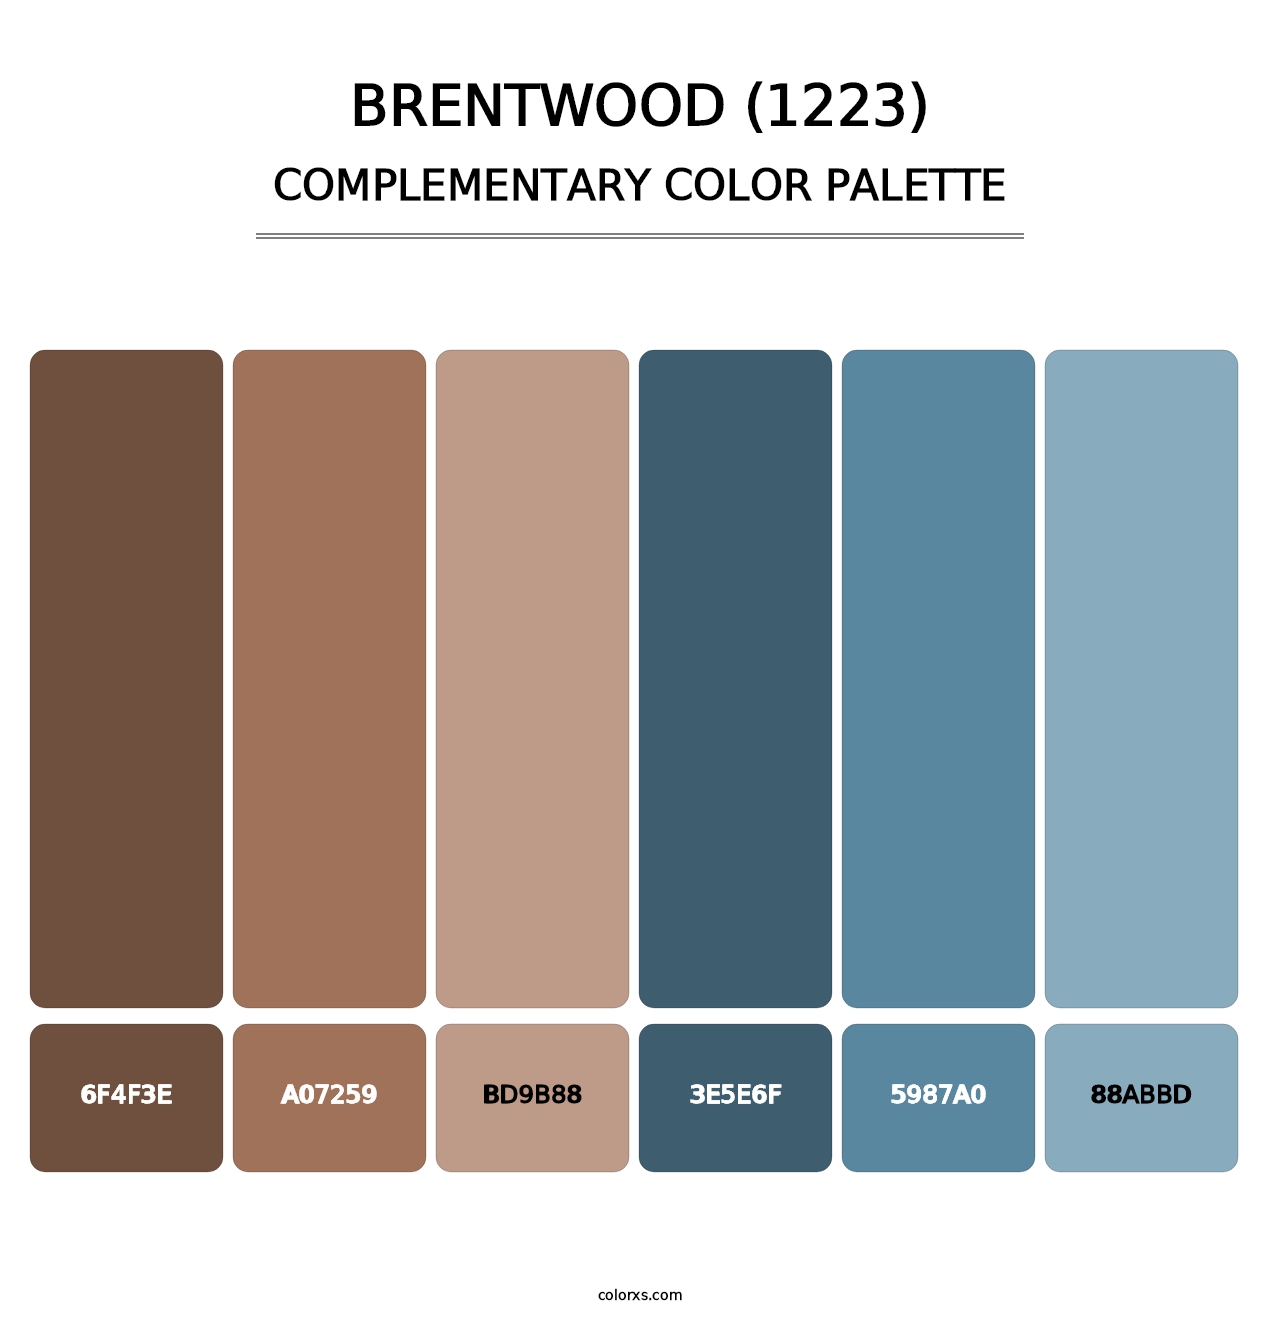 Brentwood (1223) - Complementary Color Palette